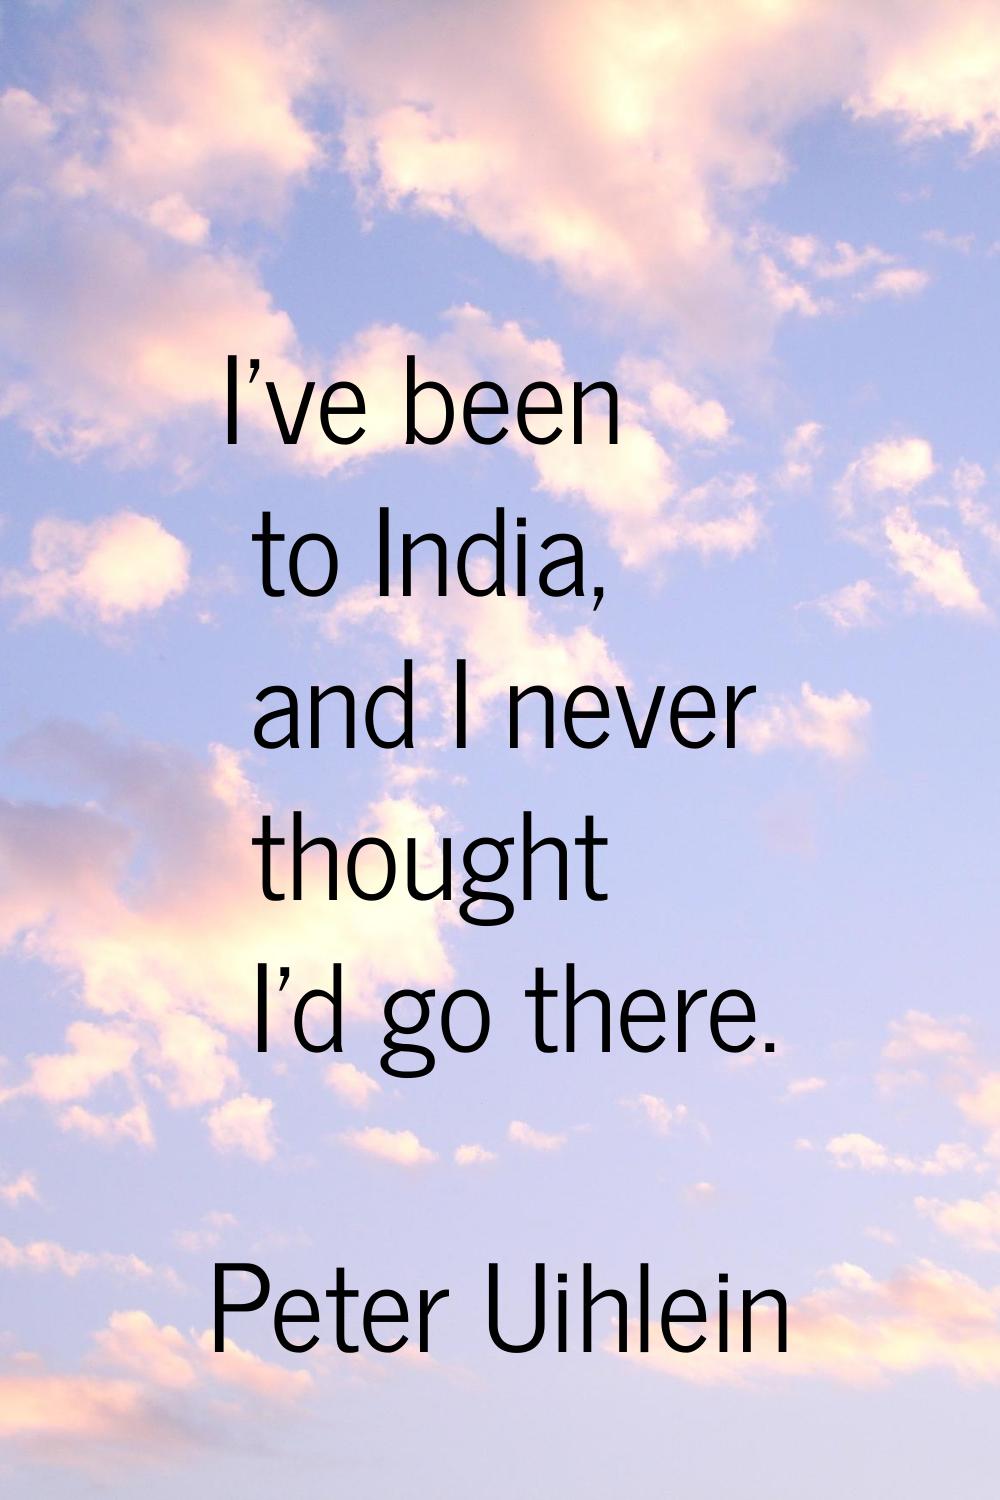 I've been to India, and I never thought I'd go there.